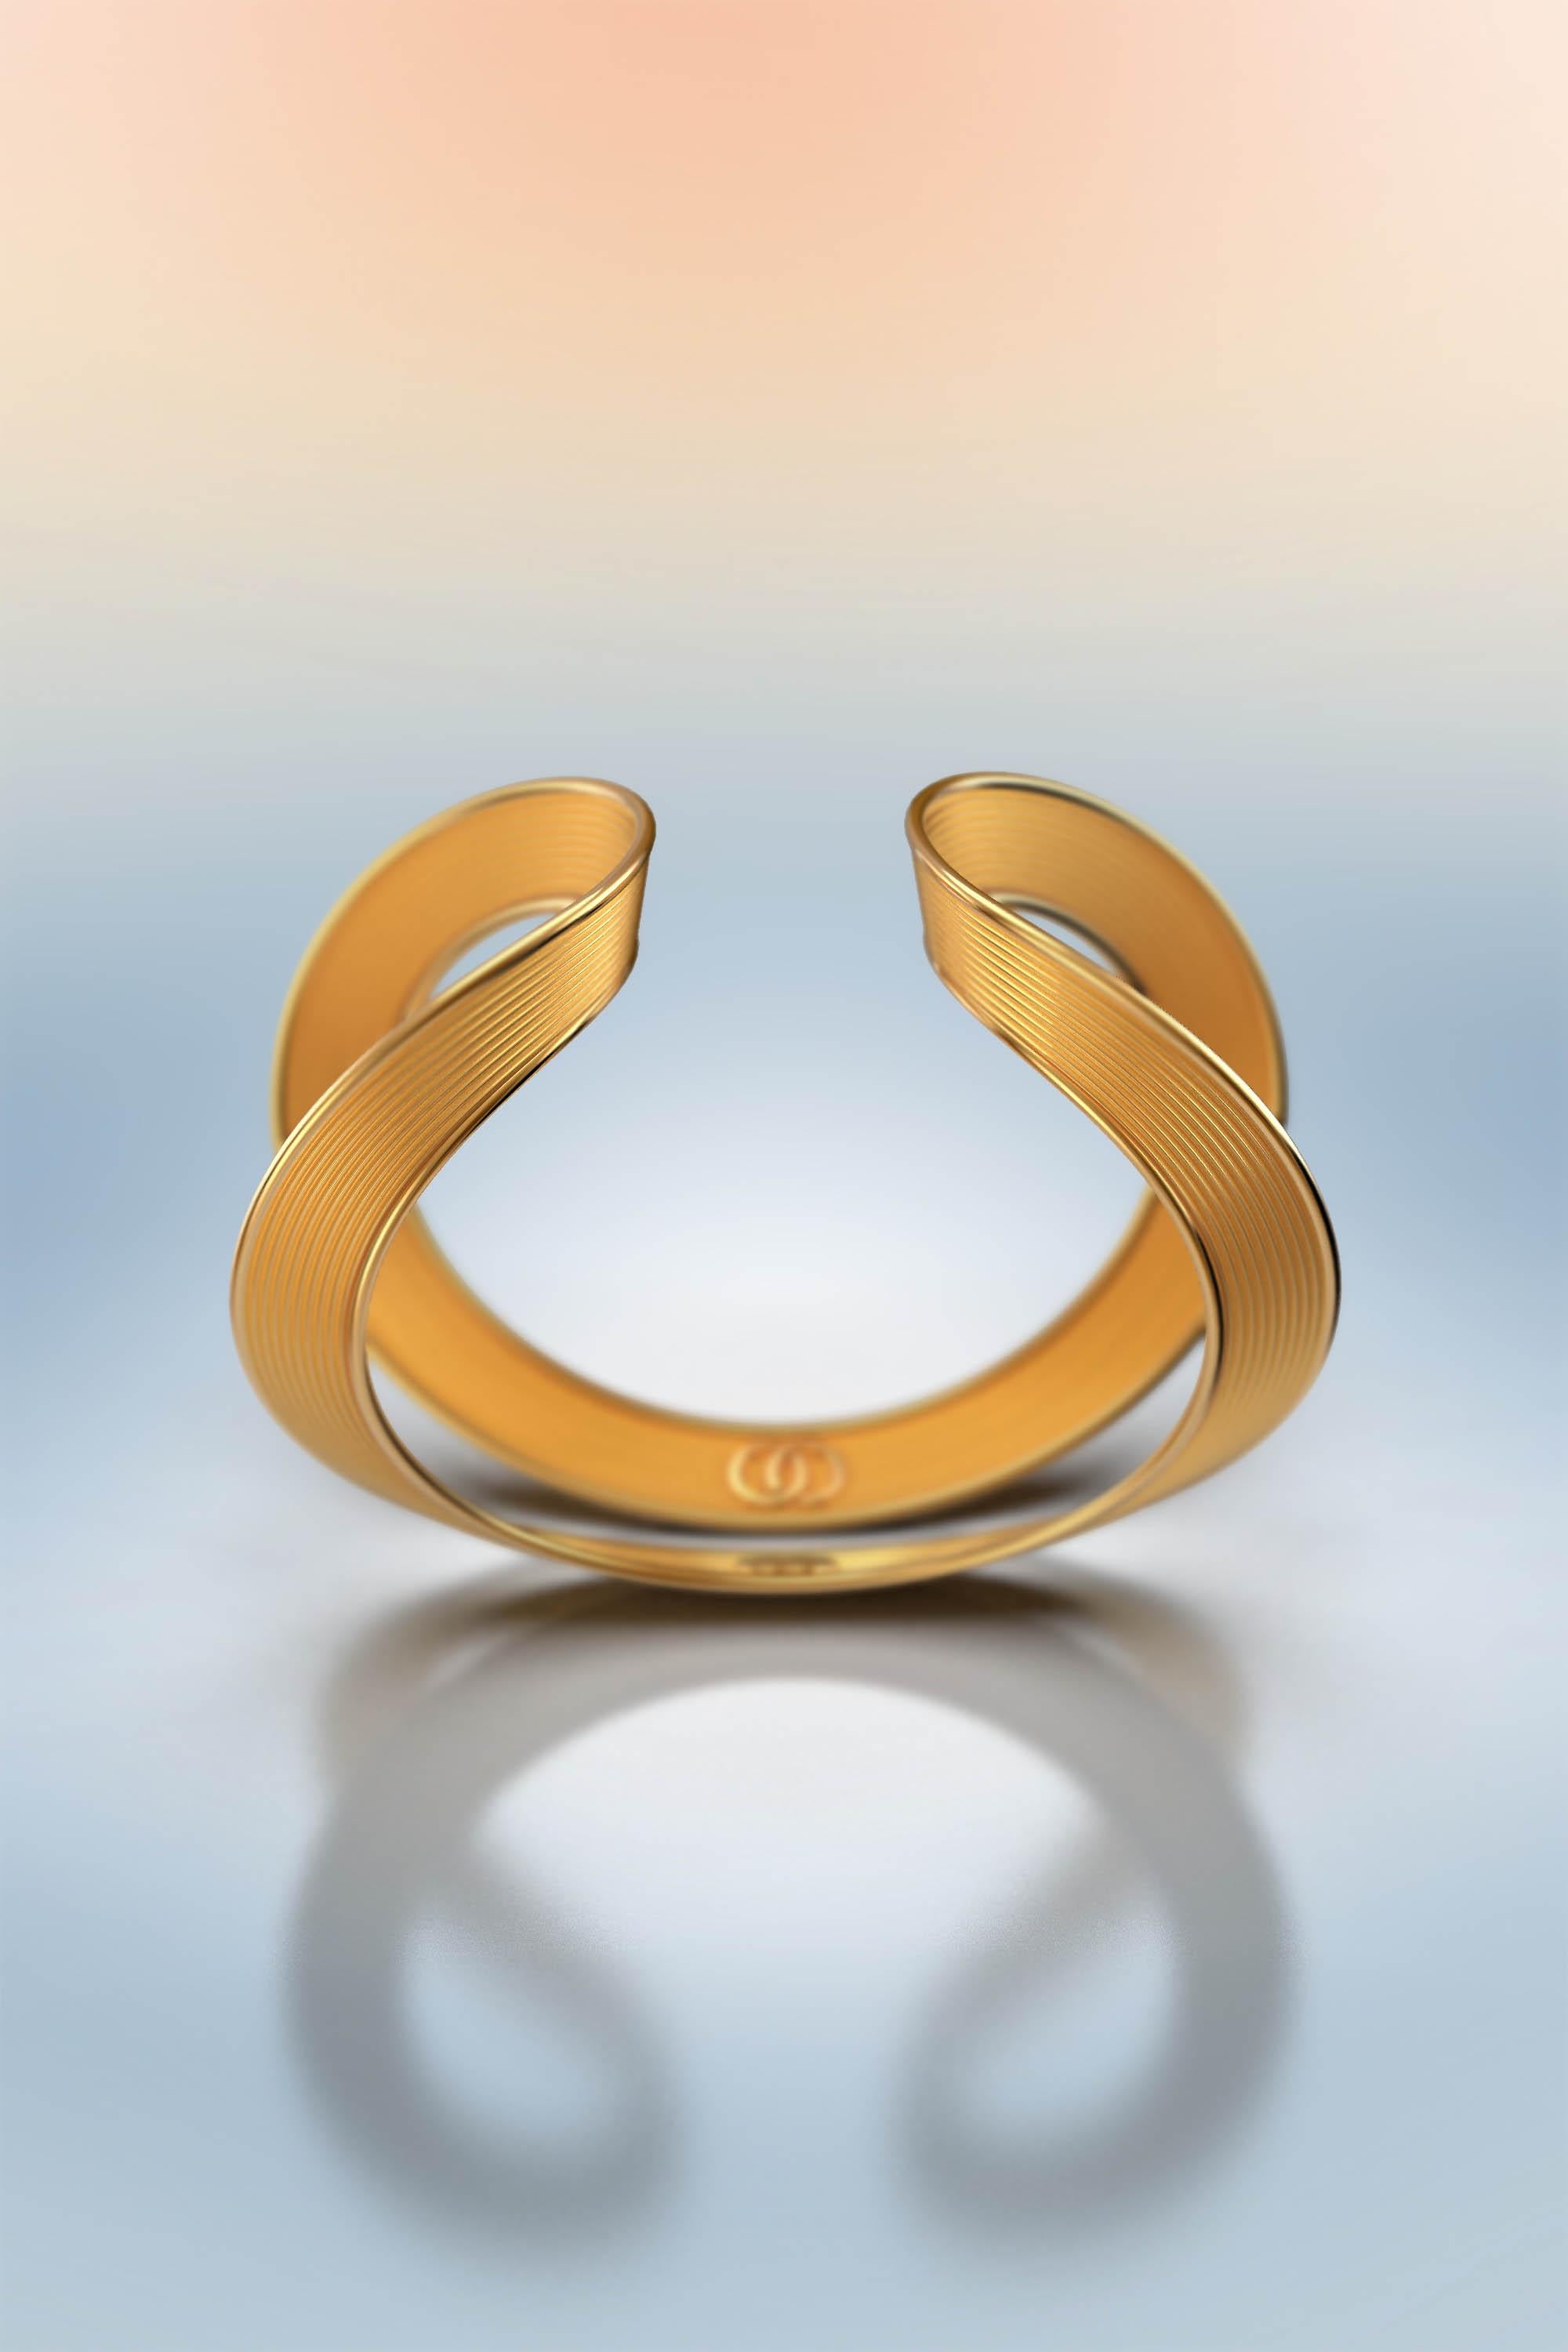 Modern shape Cuff Bracelet with a ribbed texture, crafted in polished and raw gold. Made to order in yellow, rose or white 18k gold.
The approximate weight  for the medium size is 35 grams in 18k for the medium size. The price is relative to the